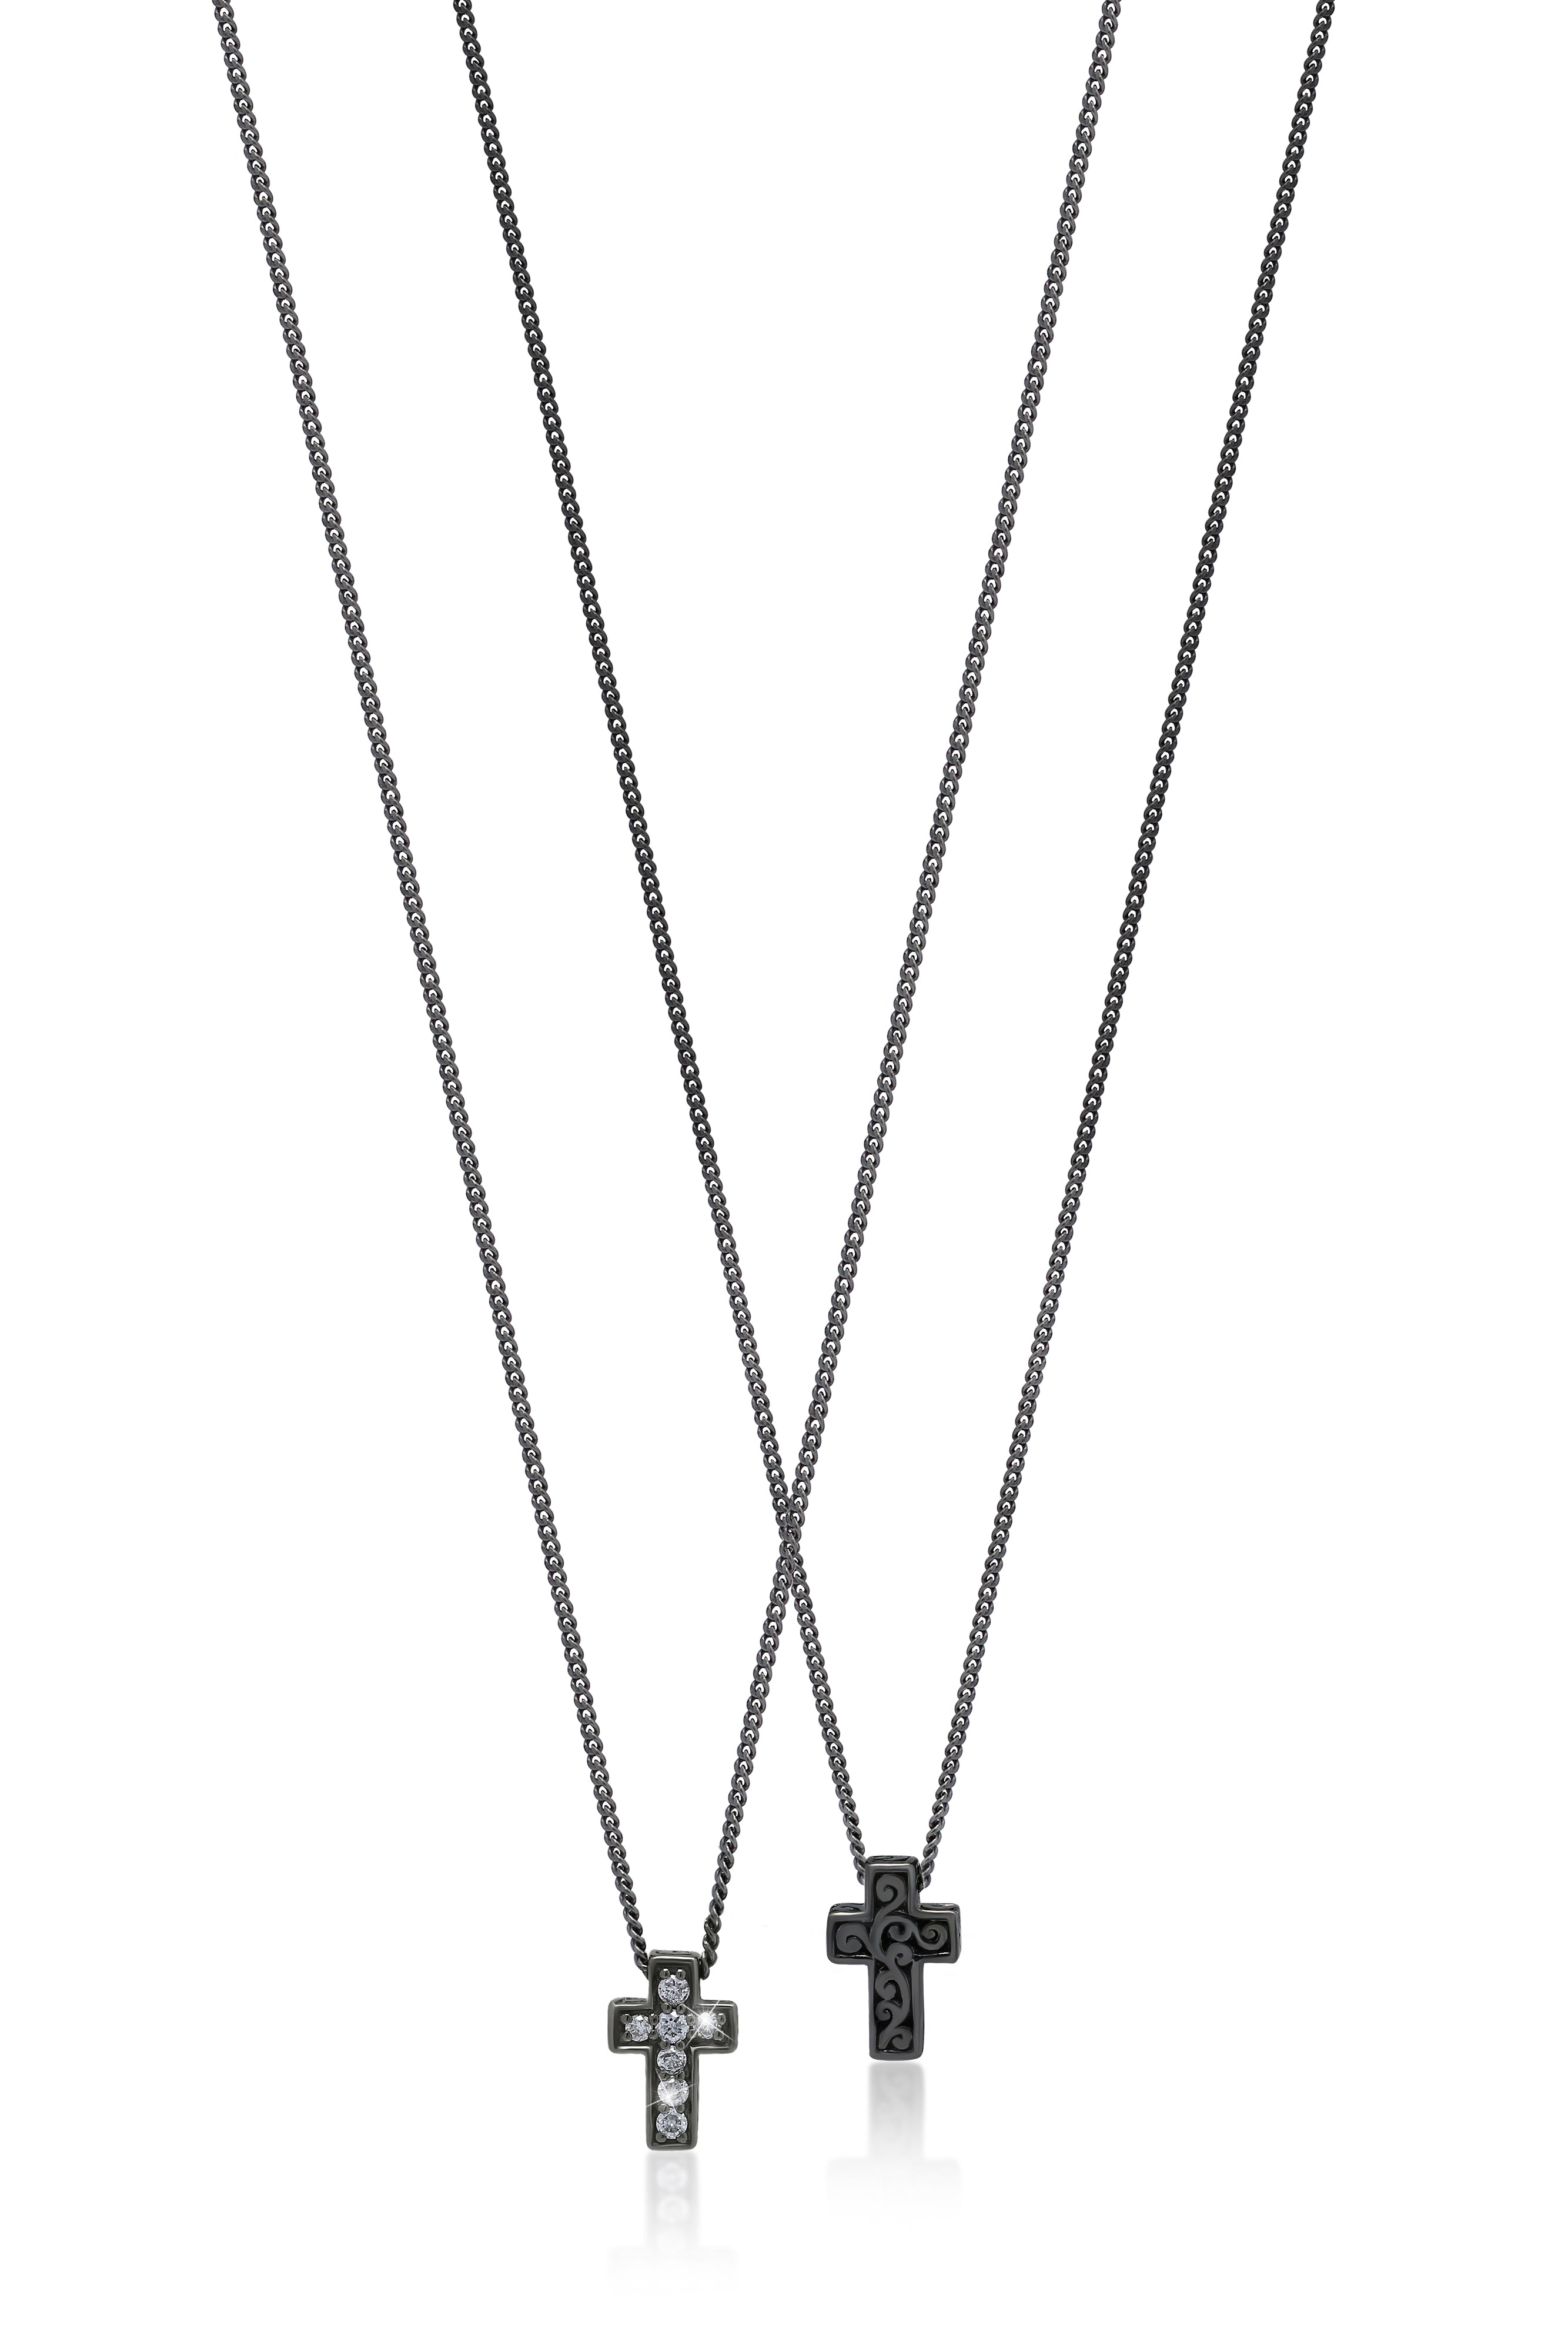 Buy Lilu Jewels Pure 925 Sterling Silver Black Enamel Lord Jesus Holy Cross  Pendant Necklace with 18 inch Chain for Women and Girls Online at Best  Prices in India - JioMart.